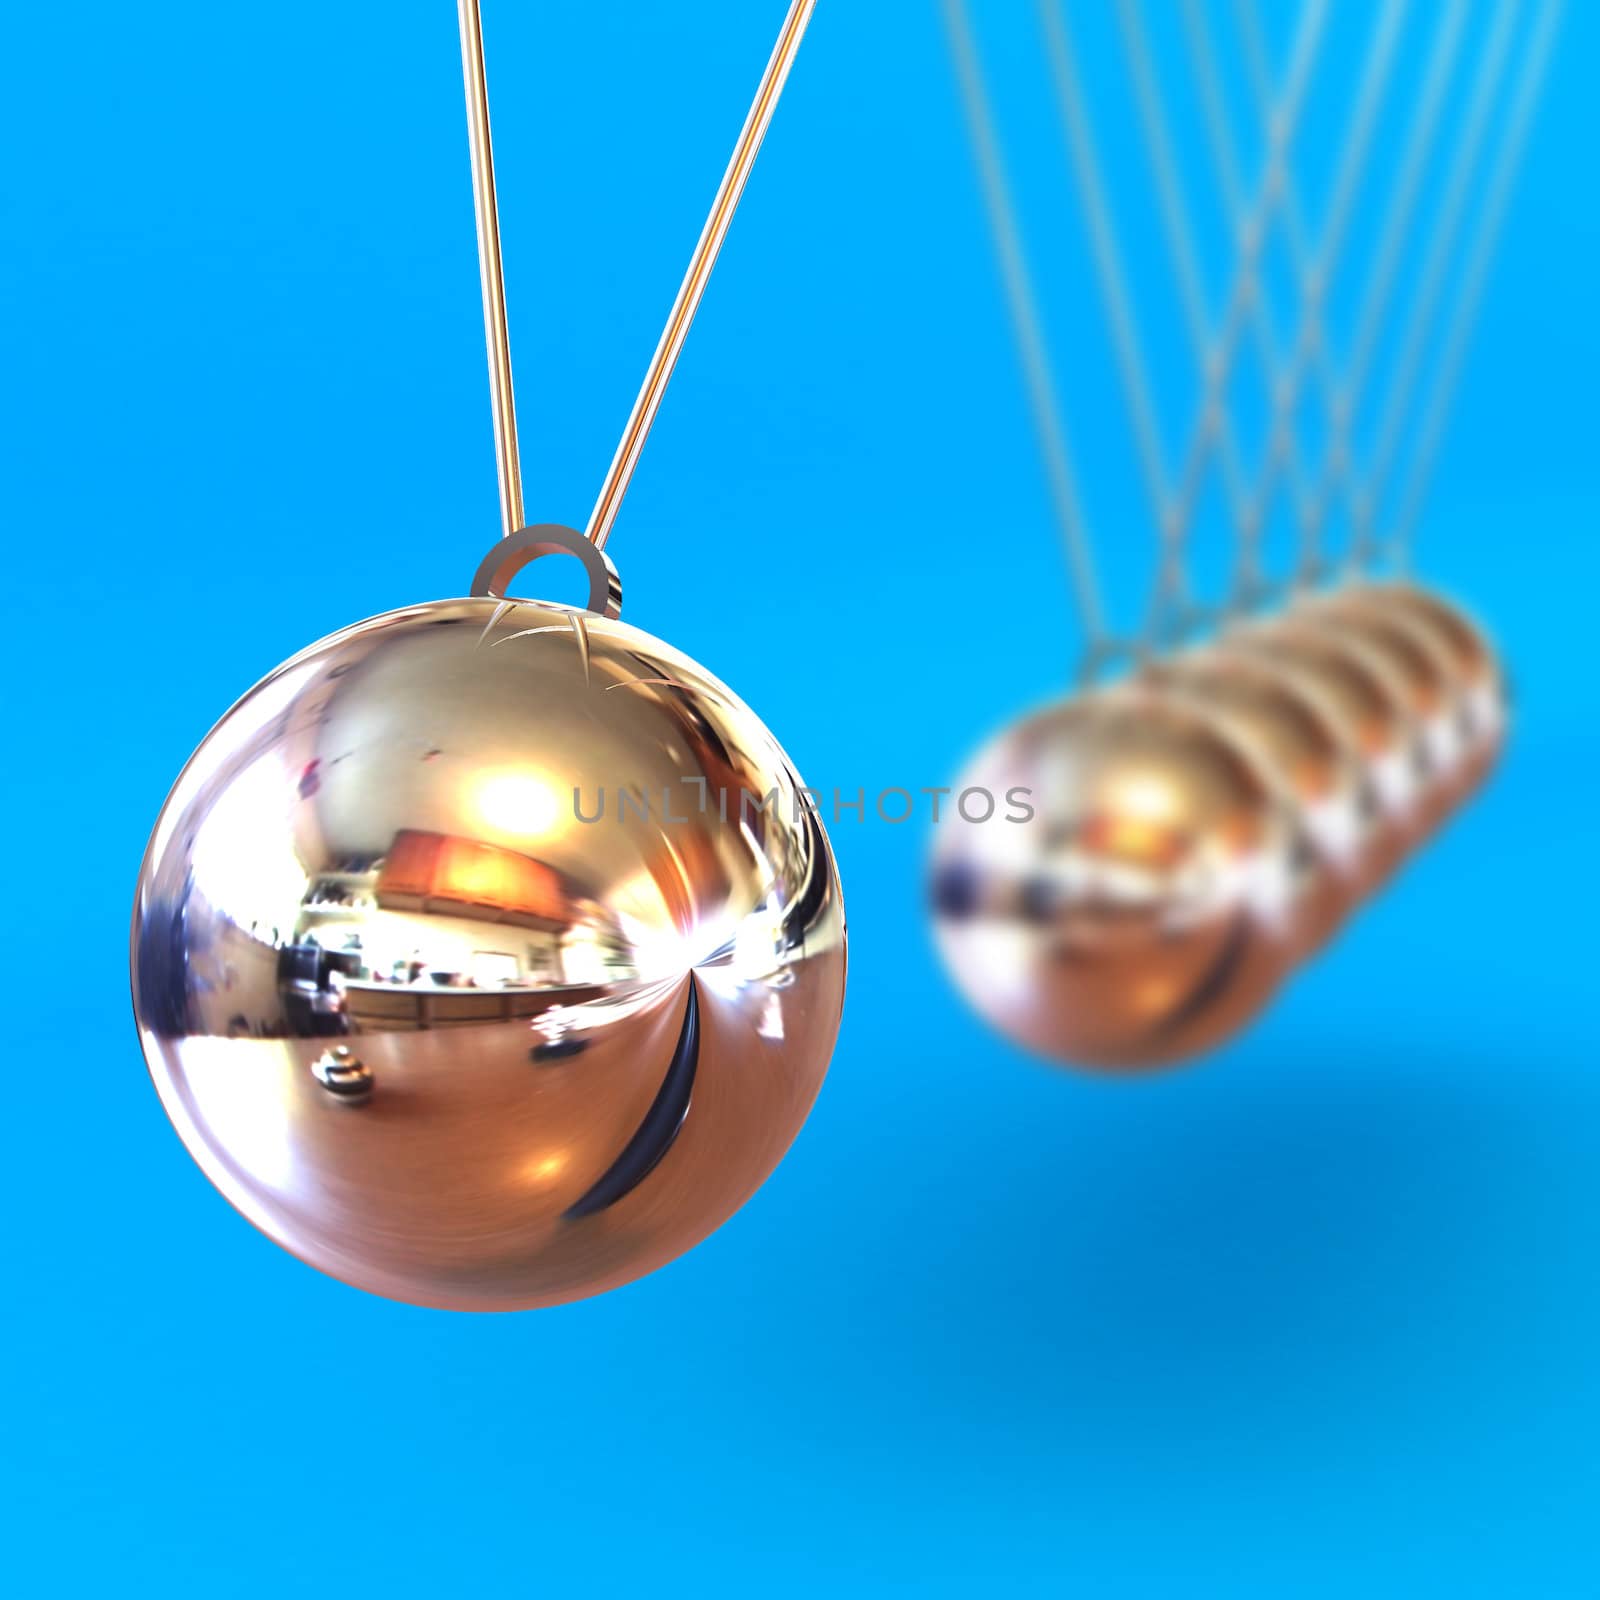 Newtons Cradle against a Blue Background by head-off